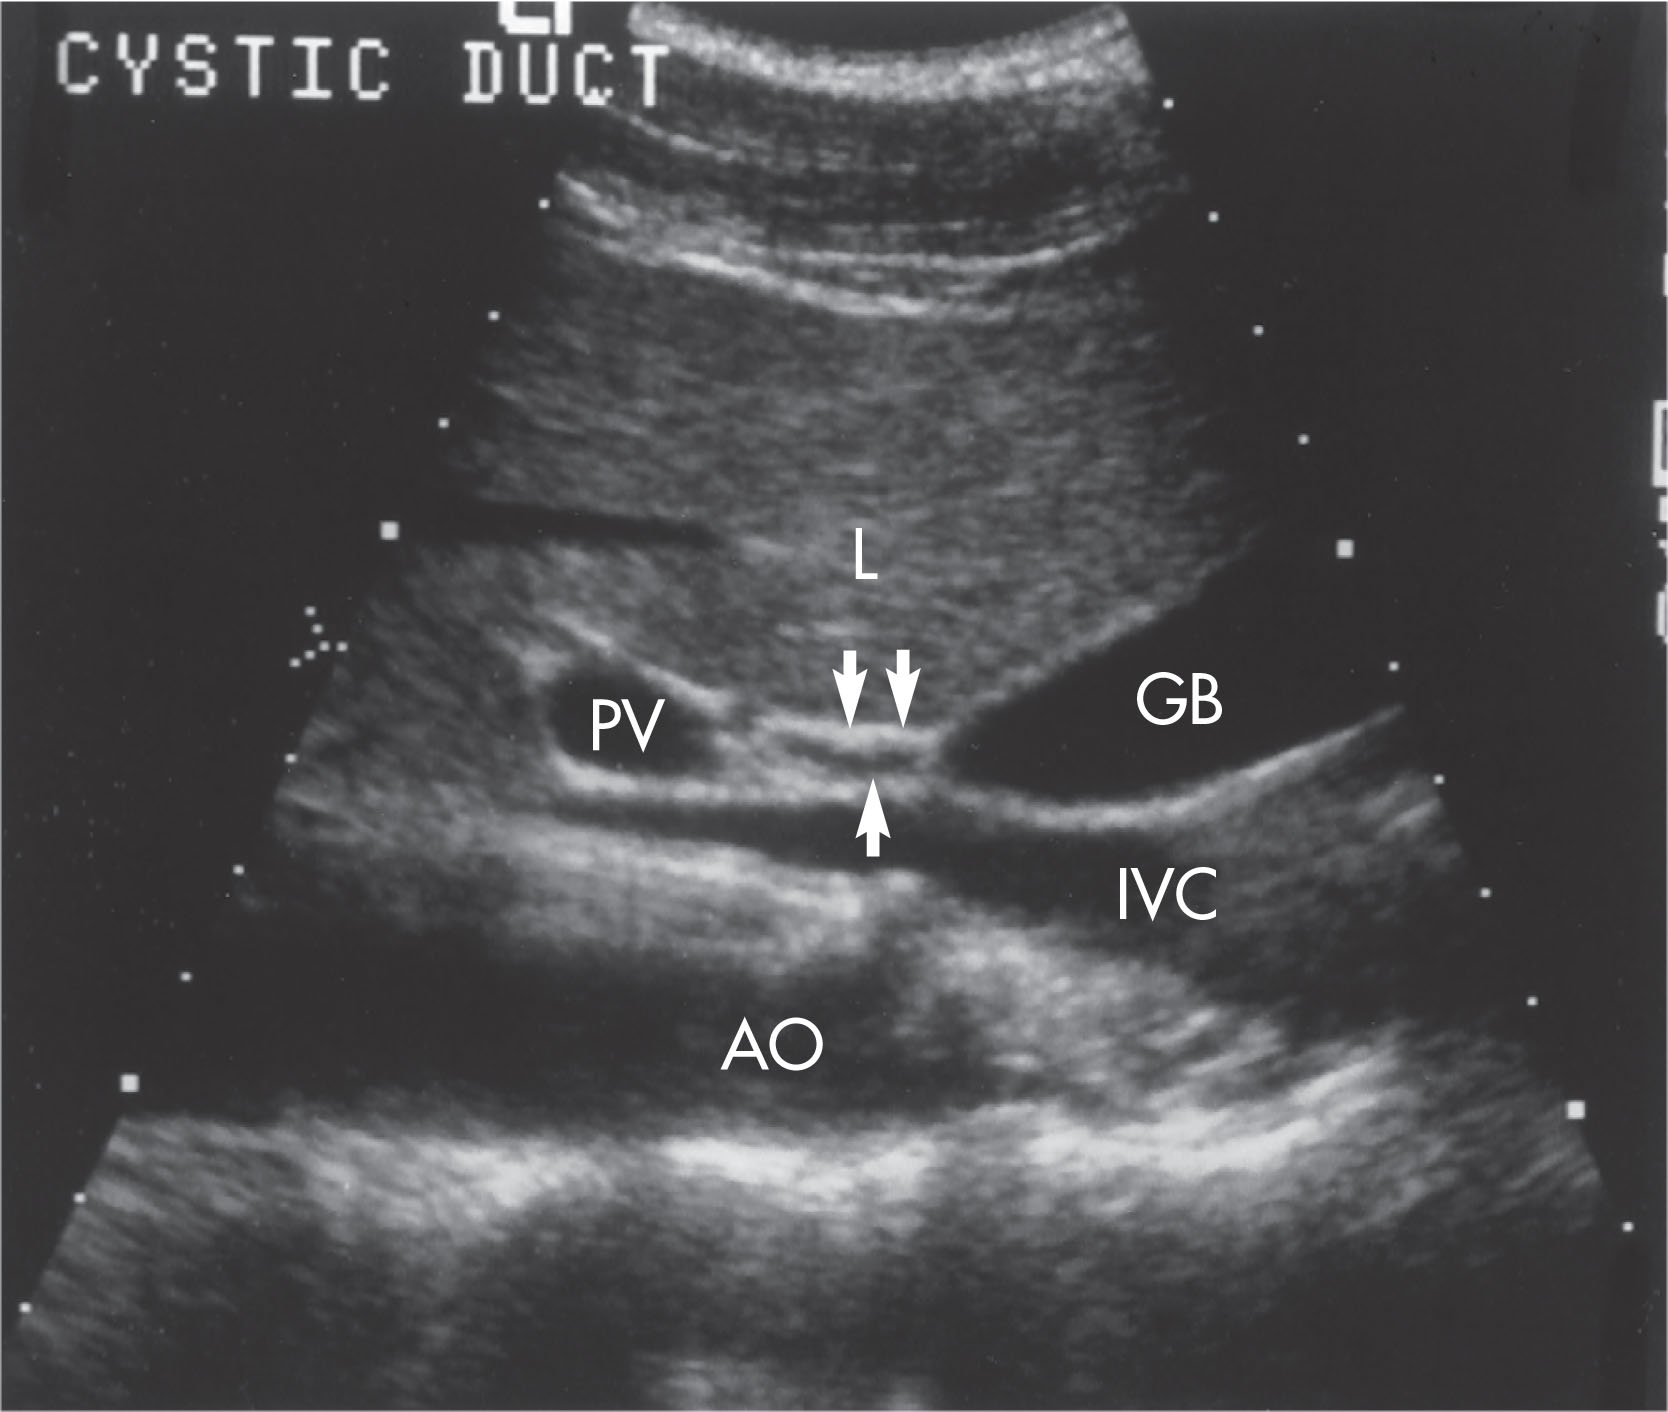 Fig. 10.16, The cystic duct is sometimes seen to arise from the neck of the gallbladder (arrows) . This coronal decubitus view shows the aorta (AO), inferior vena cava (IVC), gallbladder (GB), portal vein (PV), and liver (L).